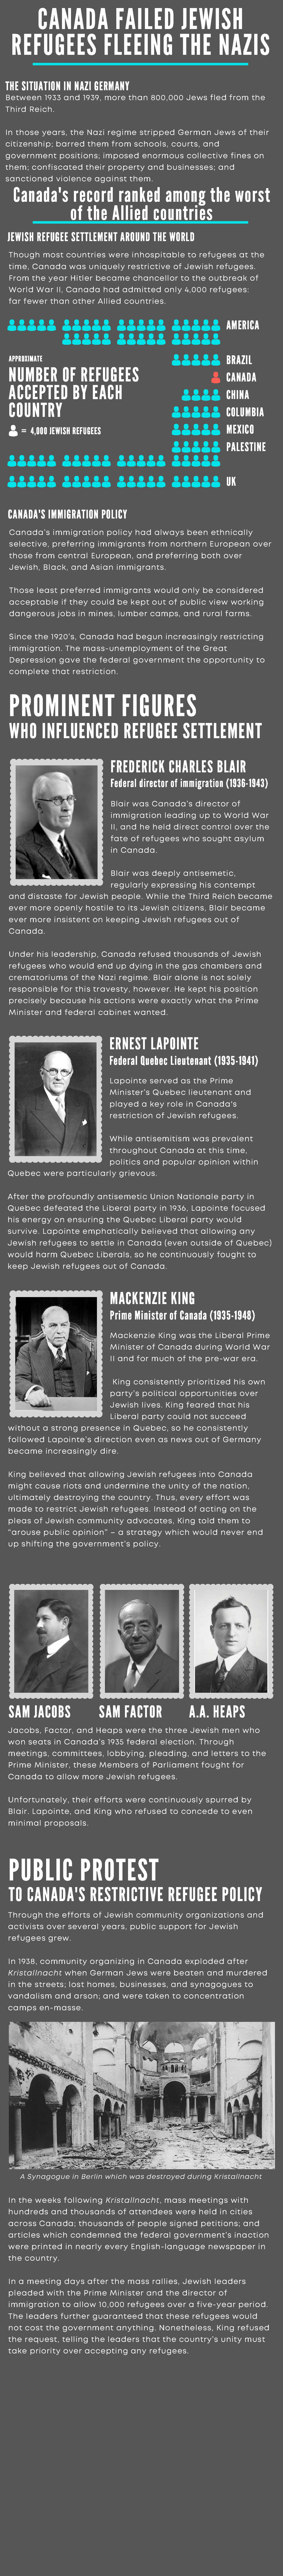 Infographic-Canada-Failed-Jewish-Refugees.-B.L.-PDF_Page_1.jpg